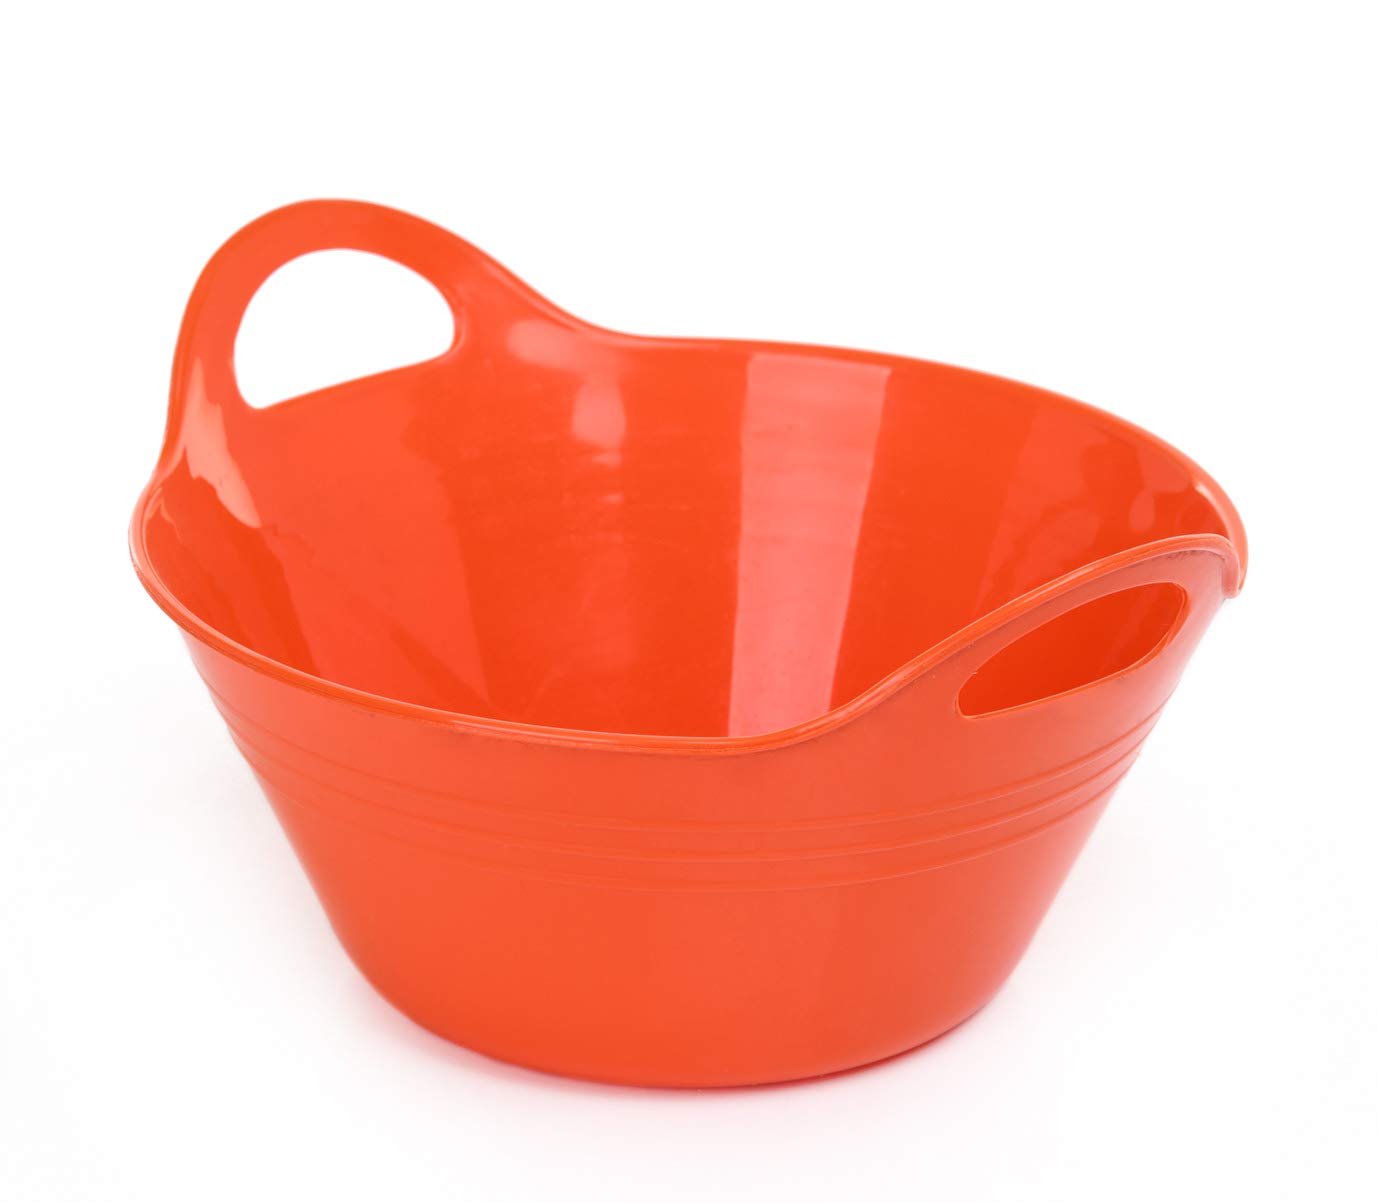 Mintra Home Plastic Bowls with Handles (4.5L Large 2pk, Orange) - 11.25W x 5inH (6.75inH with handles) - great for popcorn, snacks, drinks, candy, Halloween, trick or treat bowls